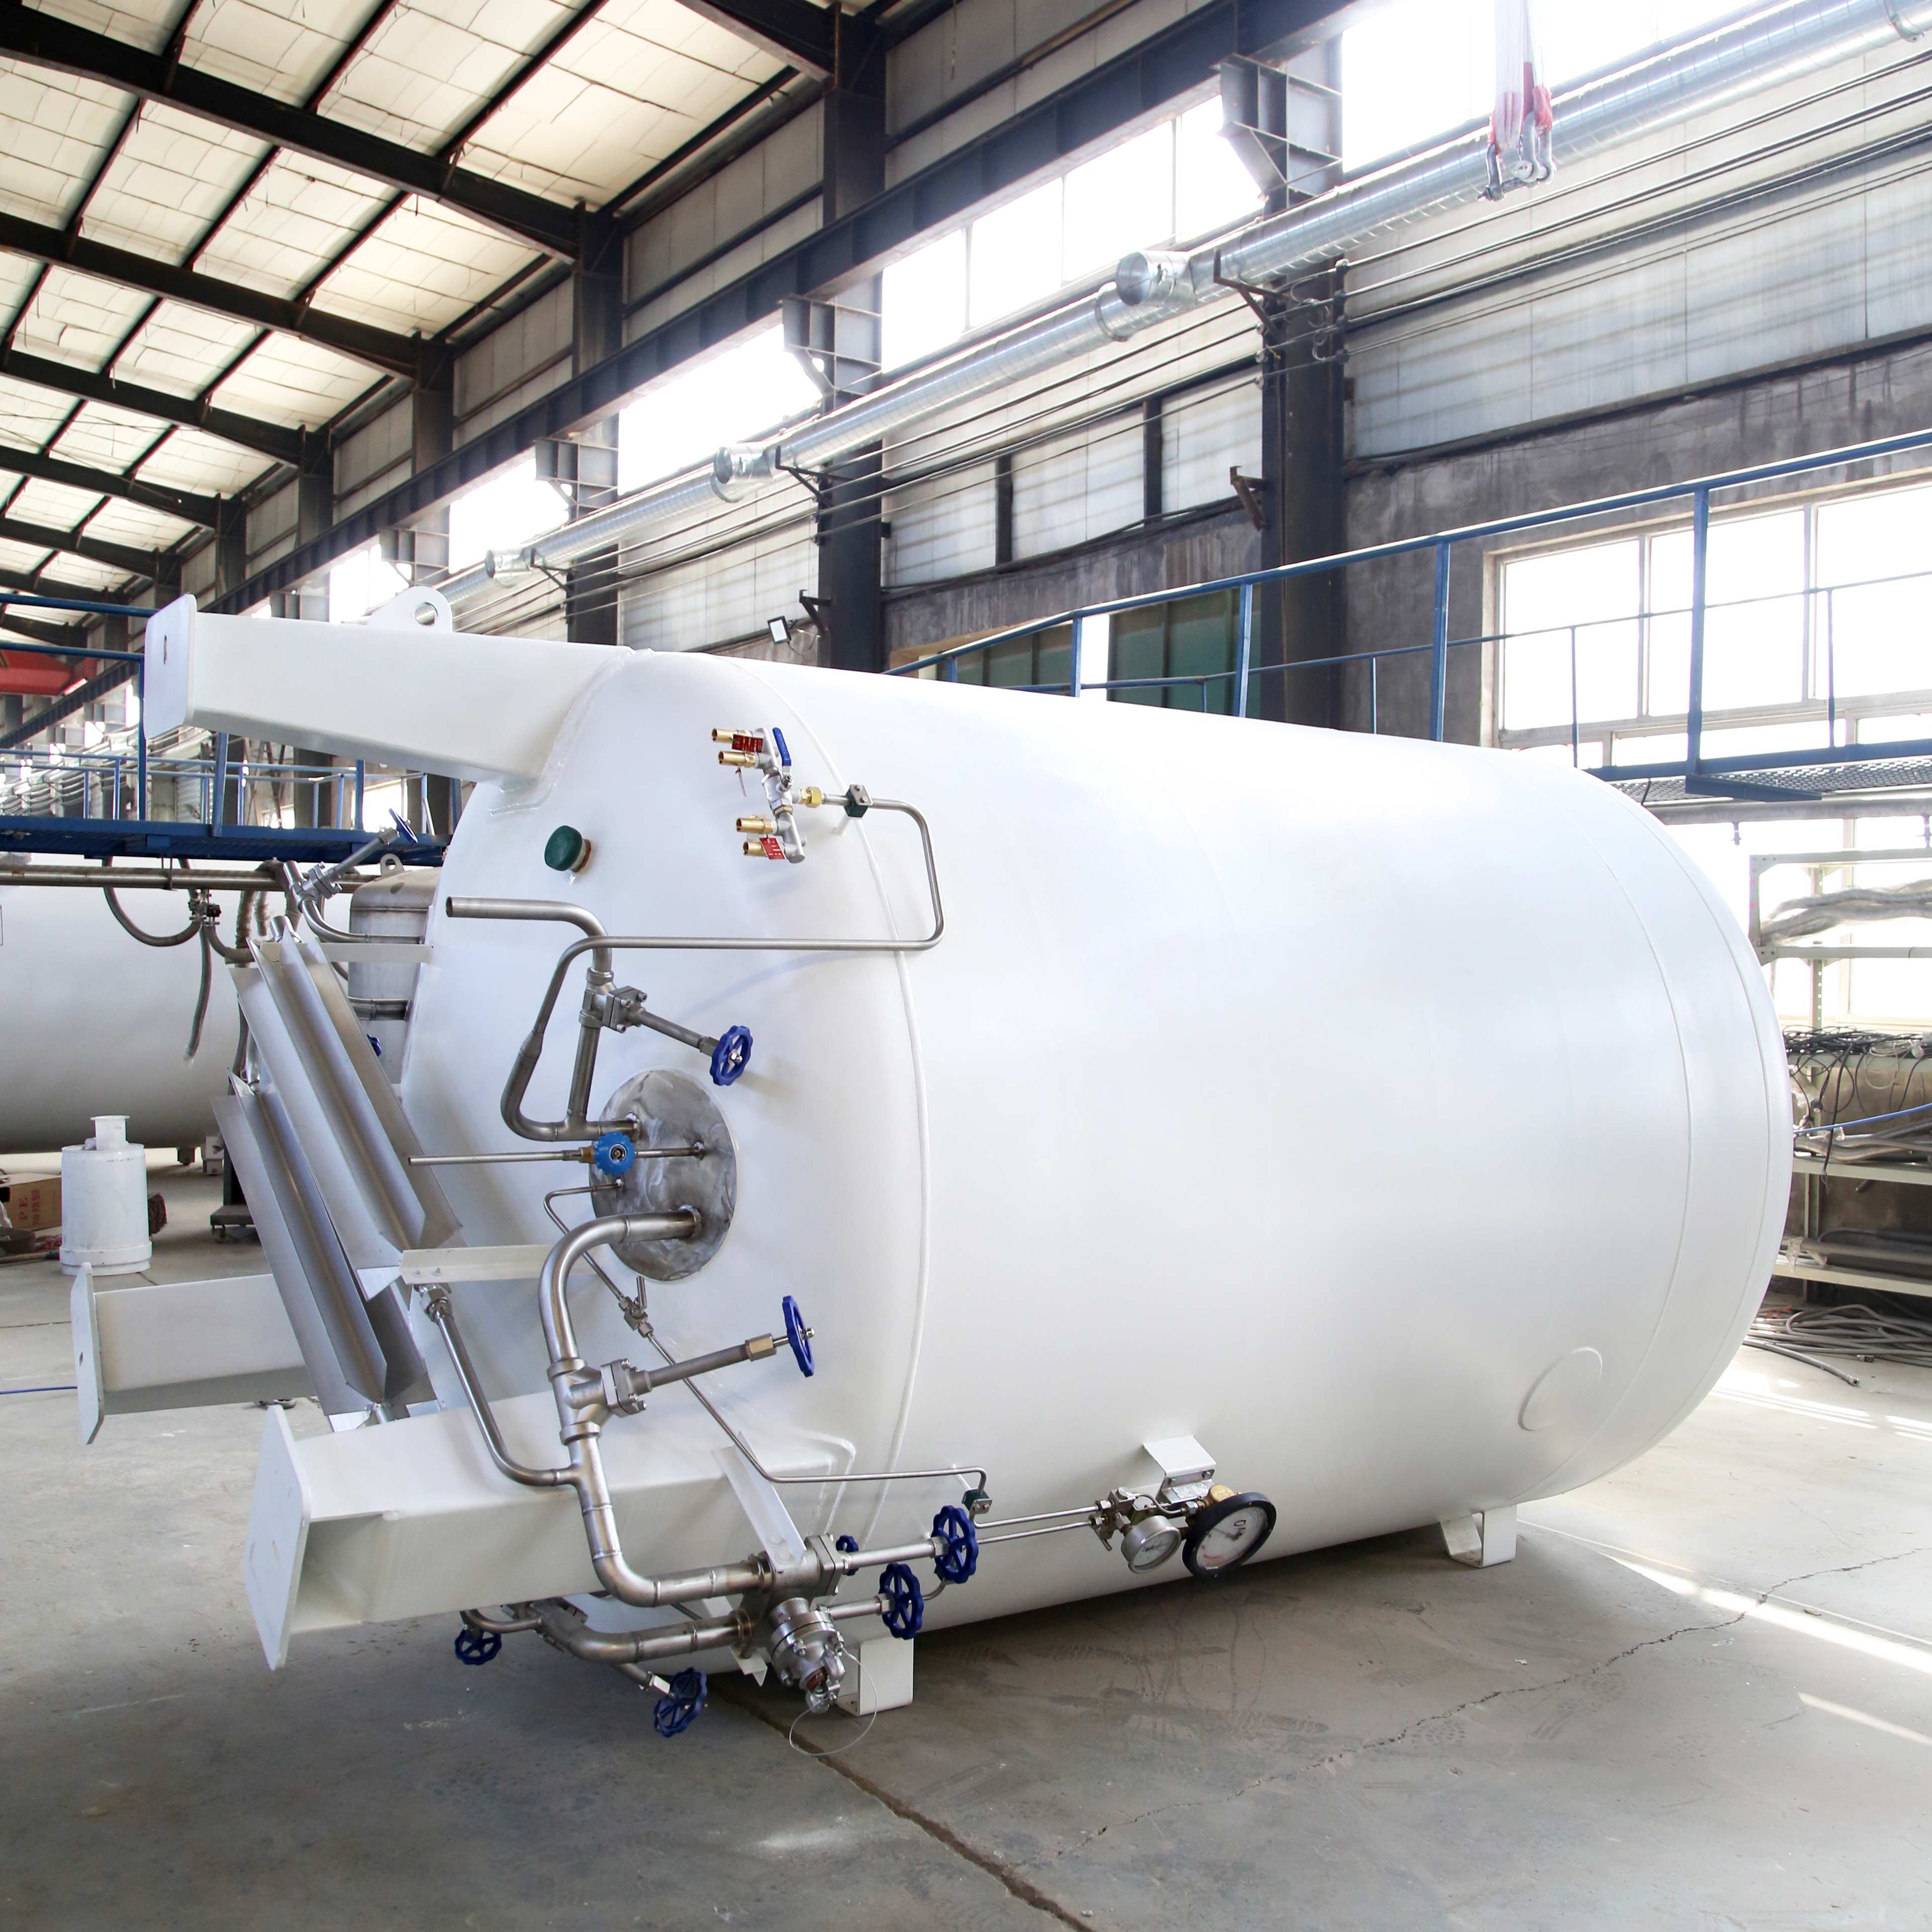 Two major factors that should be noted when selecting a cryogenic storage tank: temperature and pressure